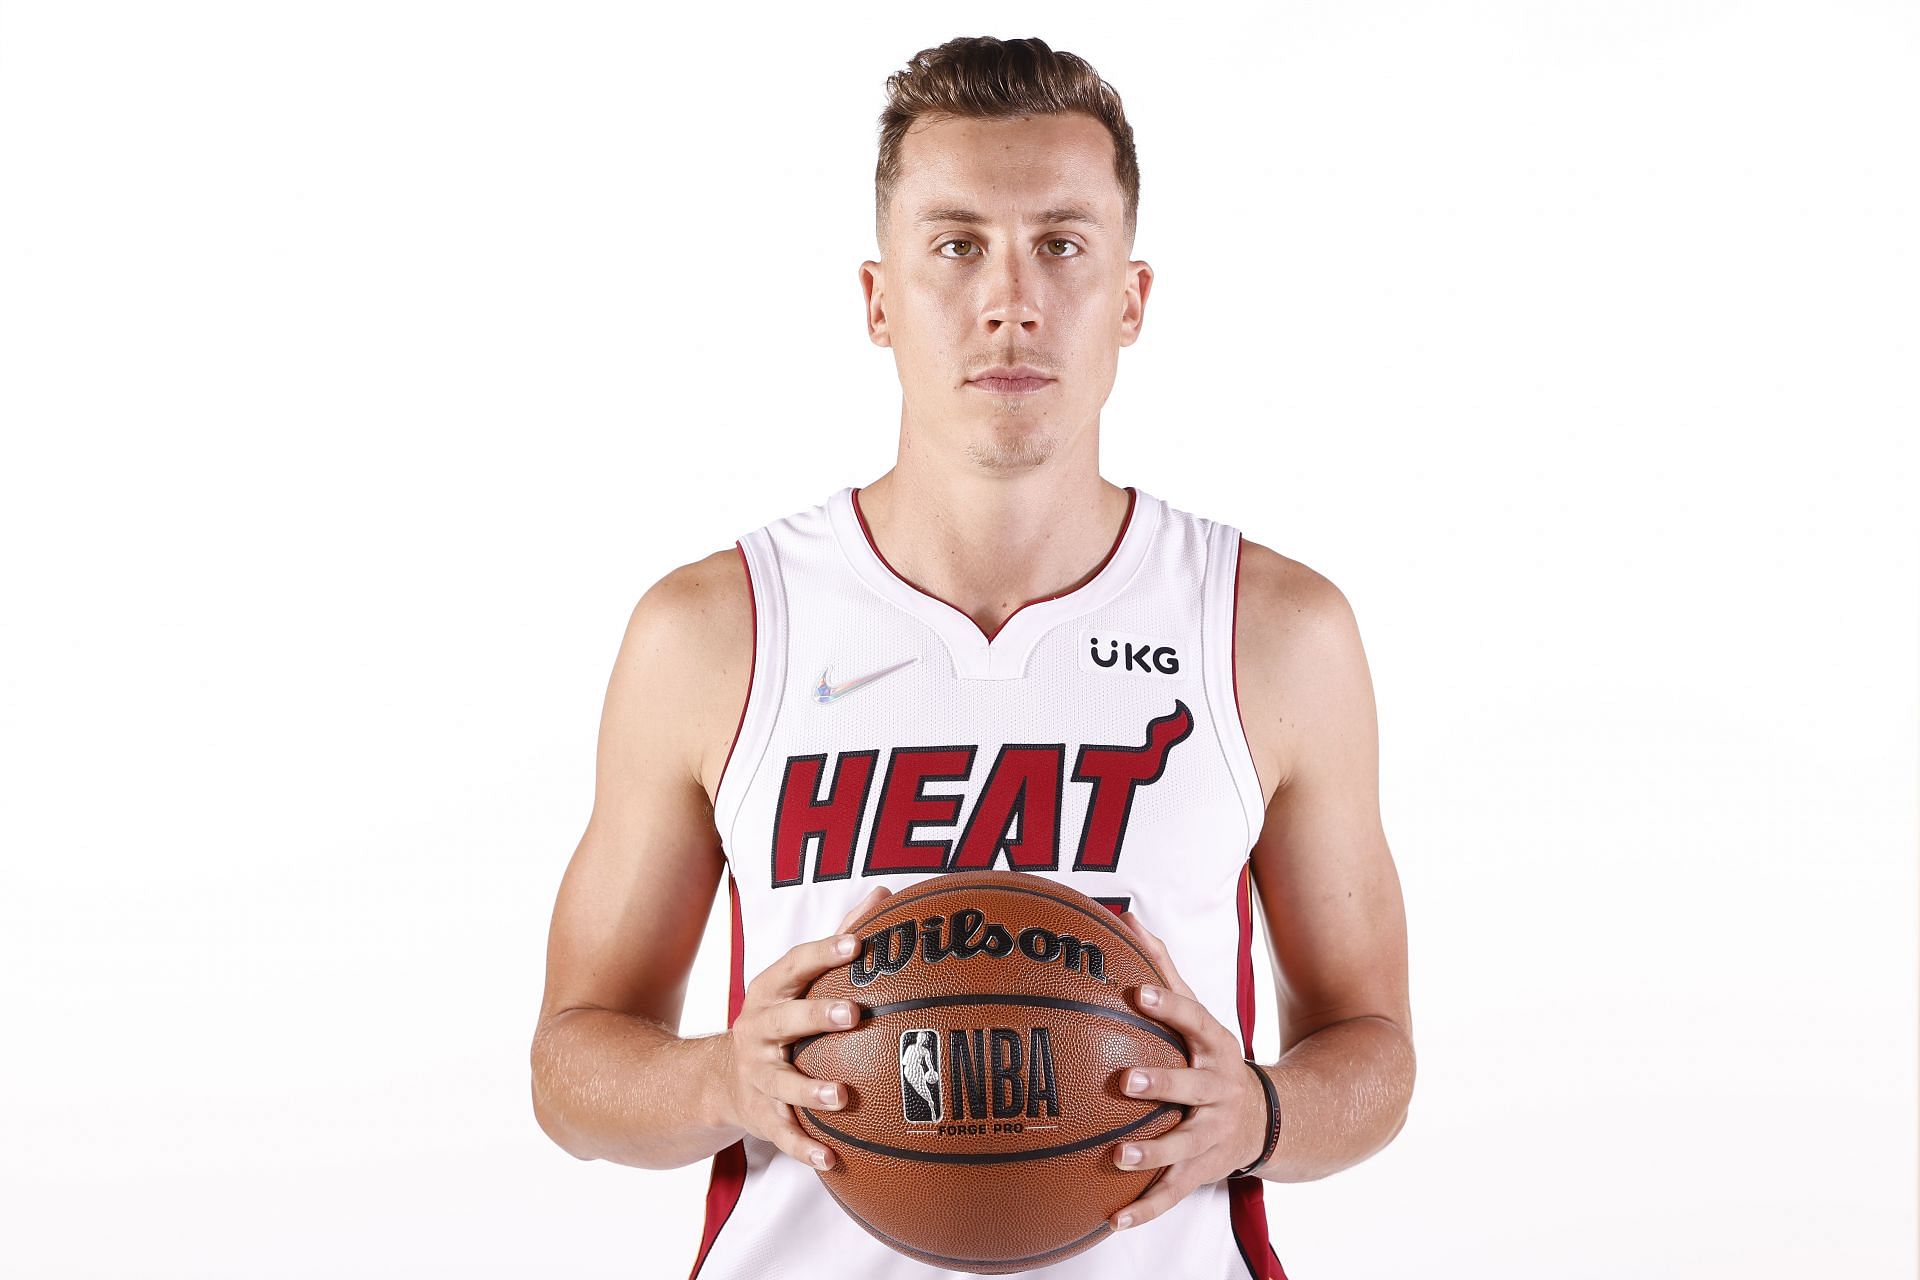 &lt;a href=&#039;https://www.sportskeeda.com/basketball/duncan-robinson&#039; target=&#039;_blank&#039; rel=&#039;noopener noreferrer&#039;&gt;Duncan Robinson&lt;/a&gt; #55 of the Miami Heat poses for a photo during Media Day at FTX Arena on September 27, 2021 in Miami, Florida.